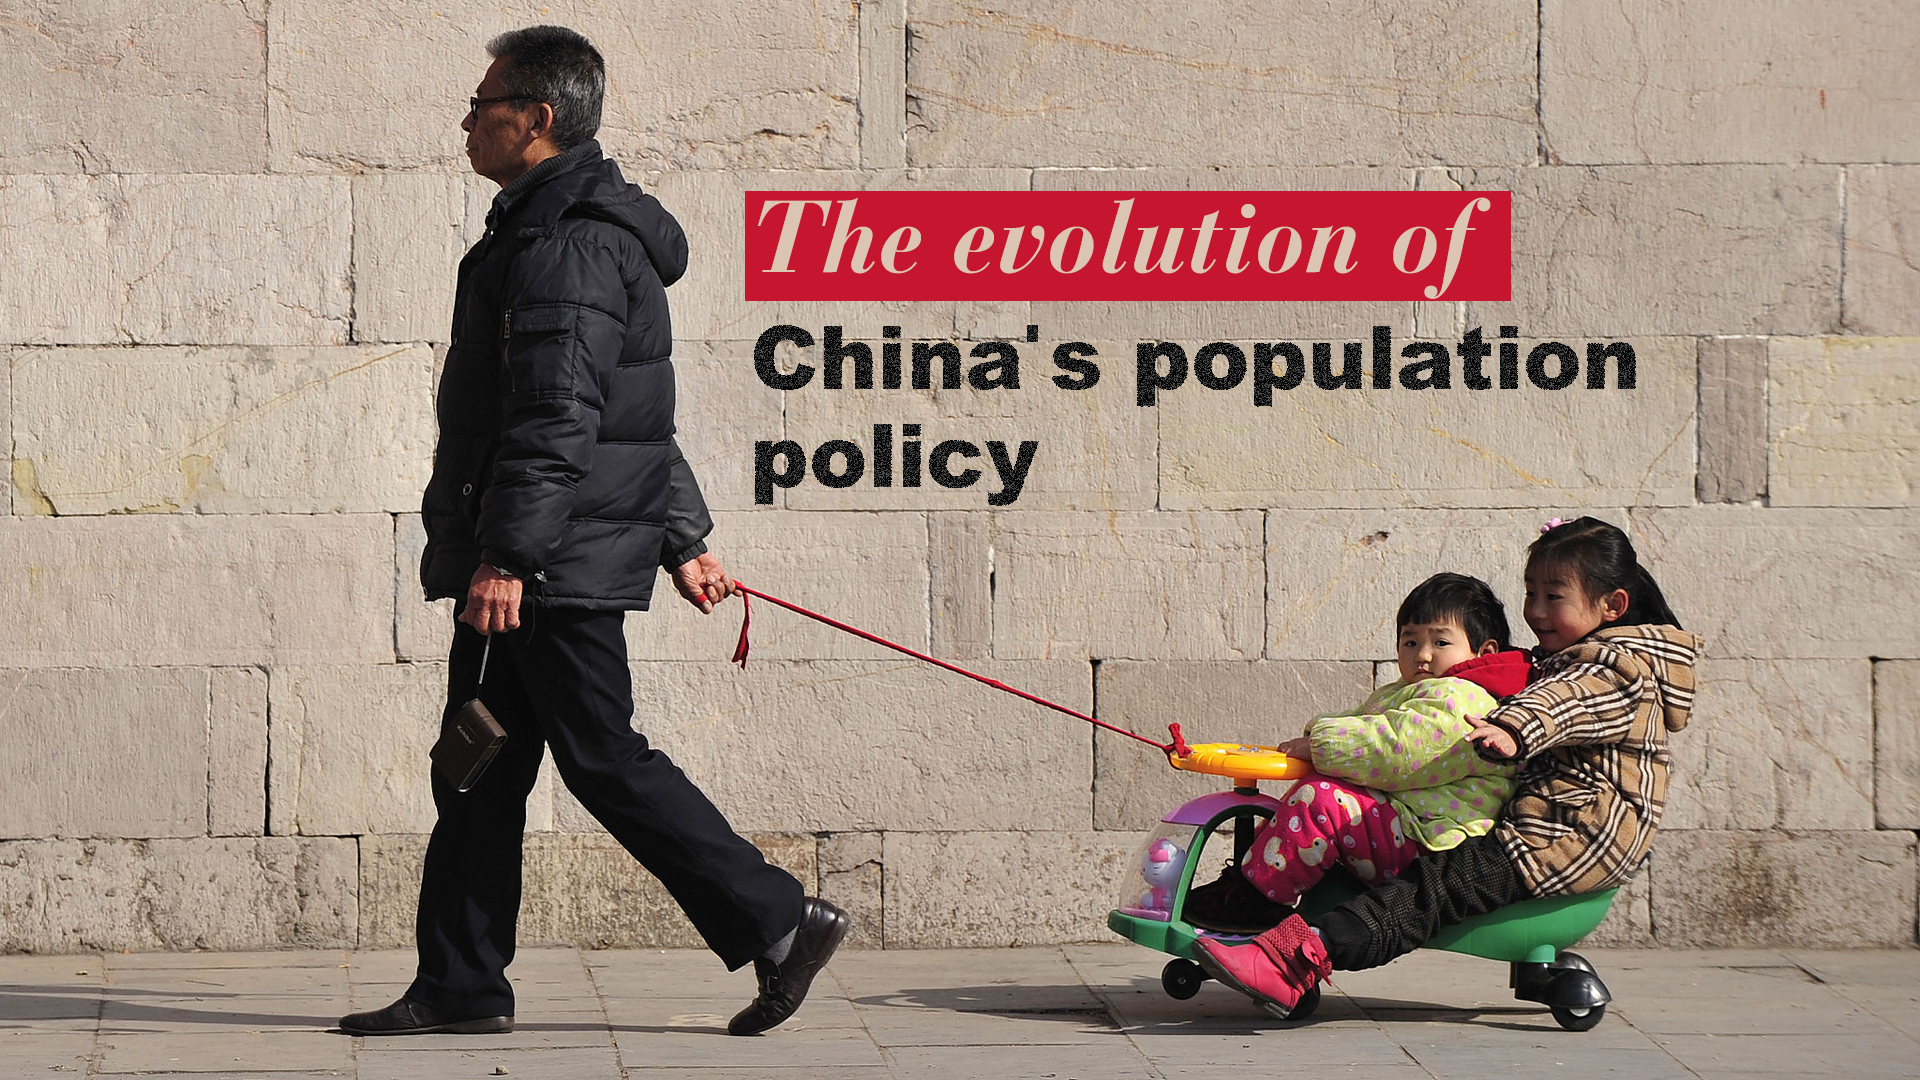 case study on one child policy in china